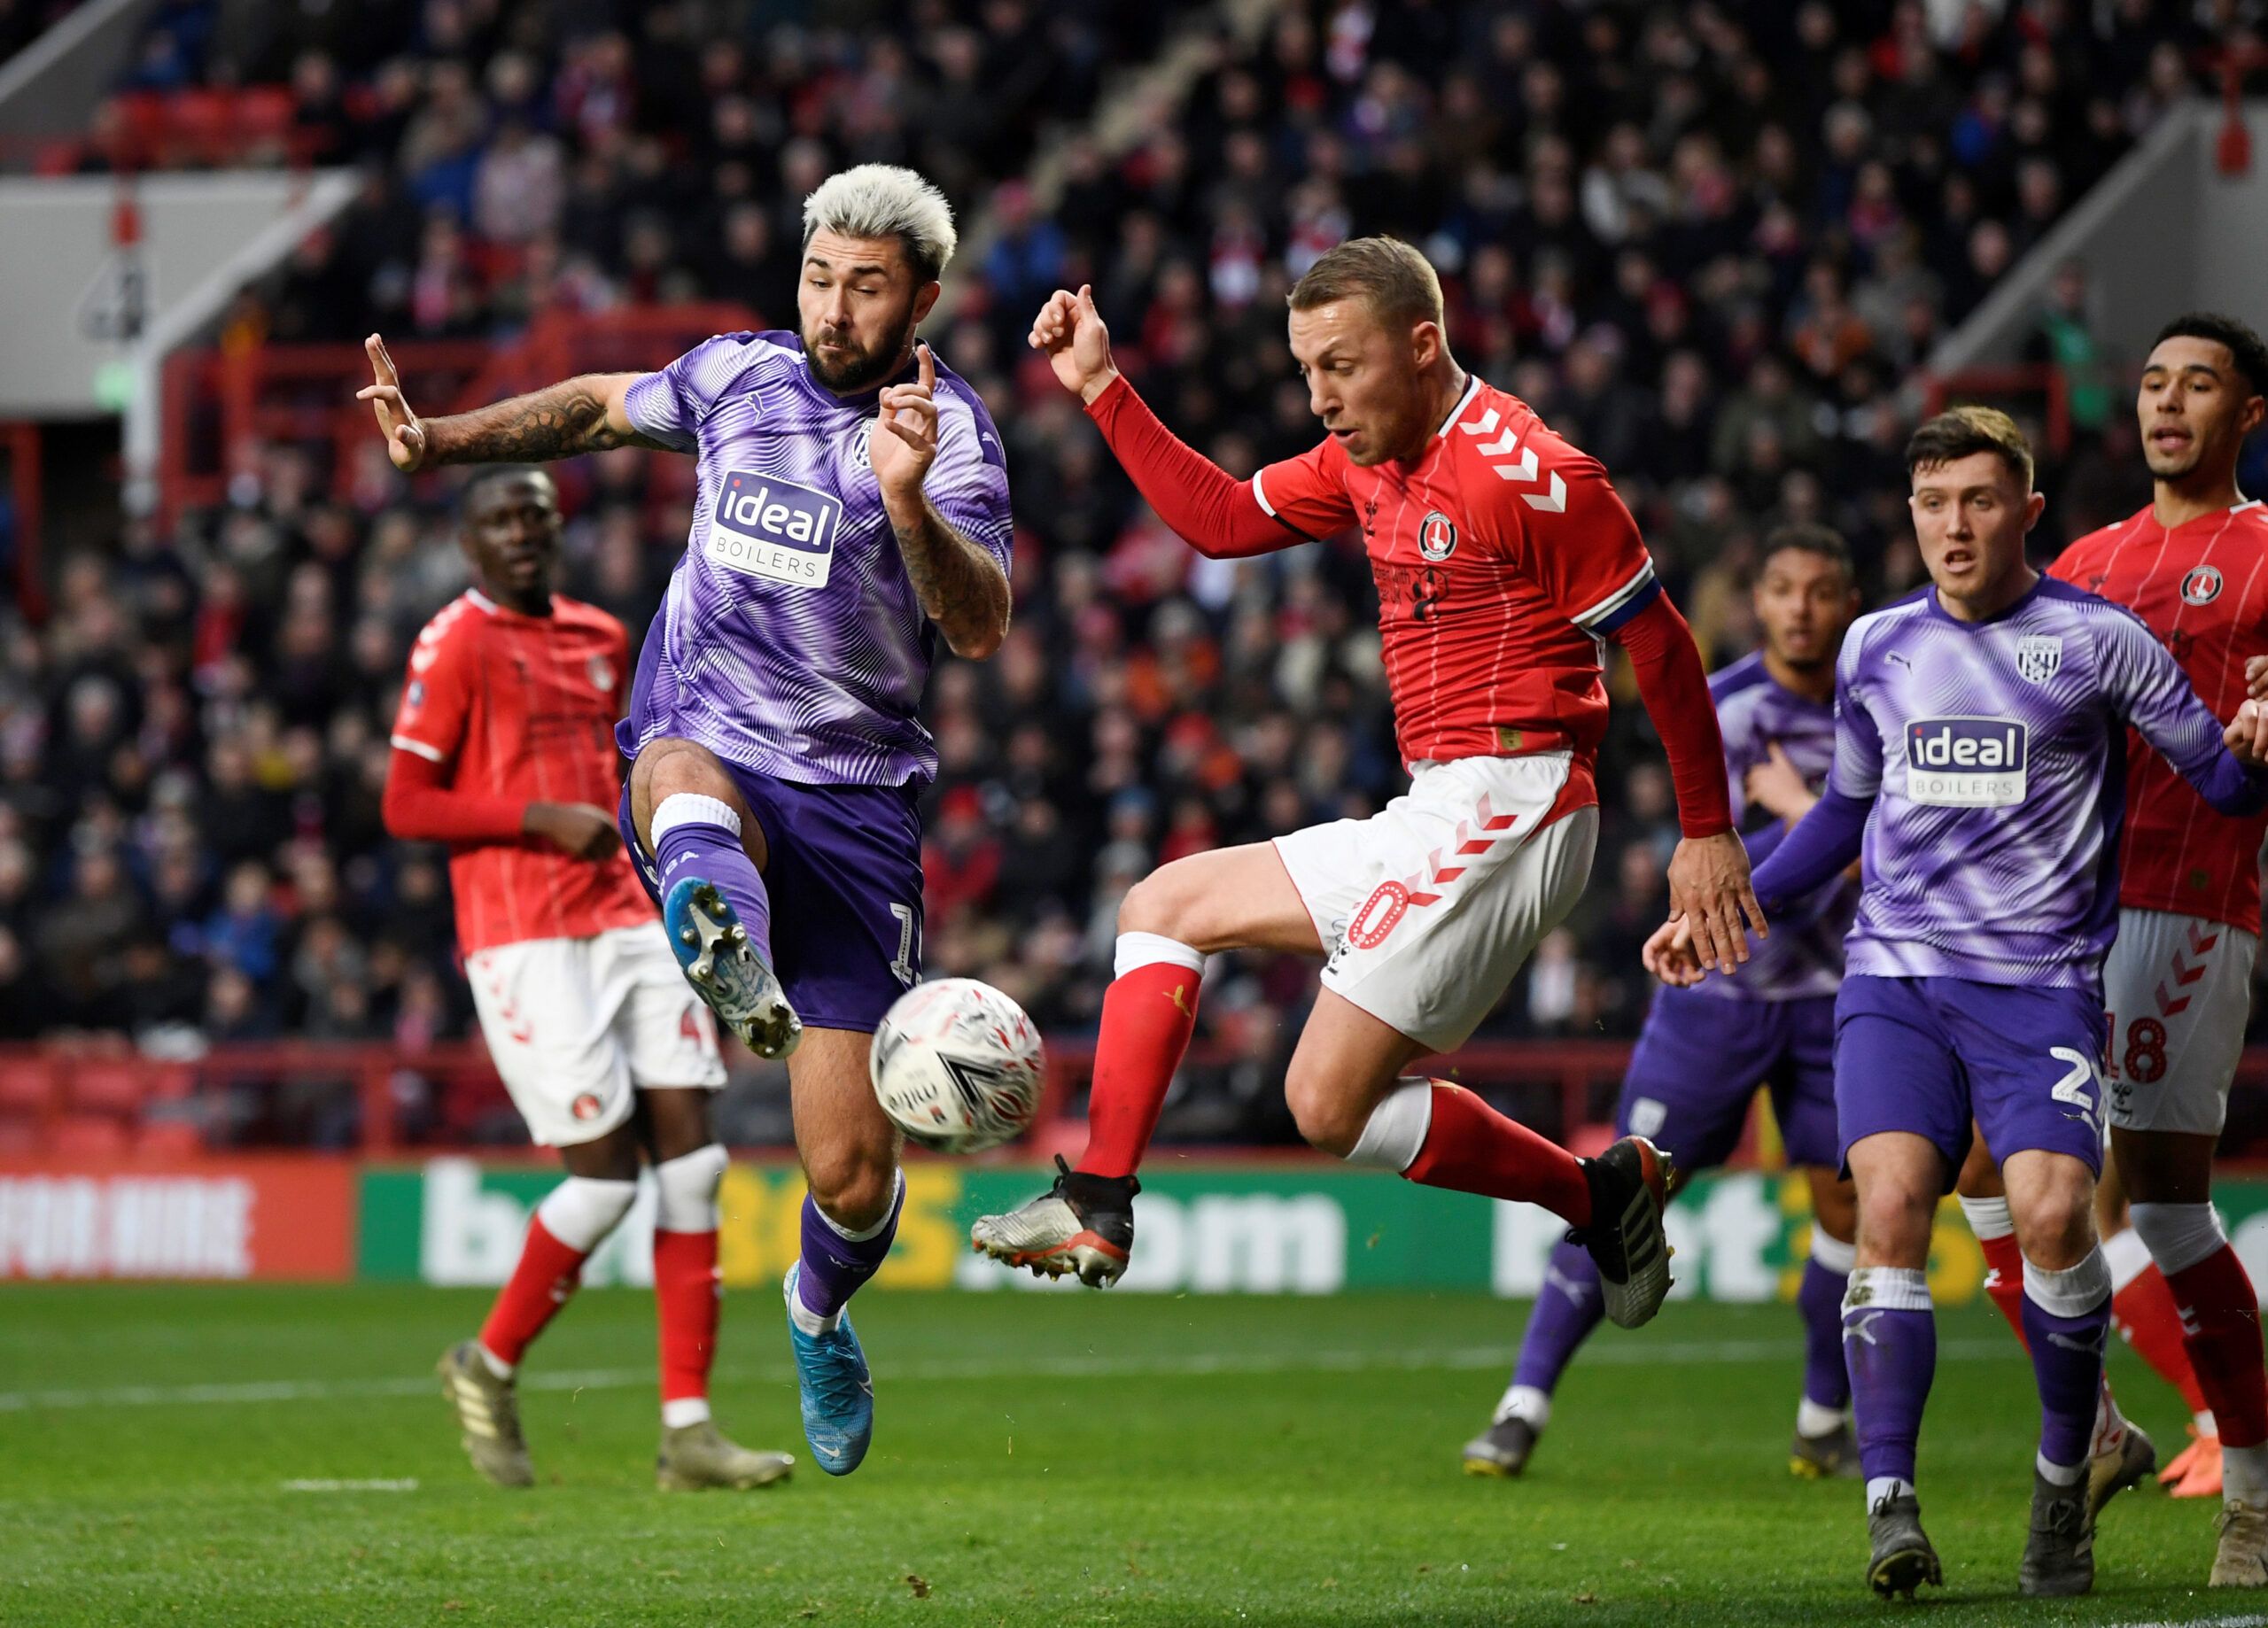 Soccer Football - FA Cup - Third Round - Charlton Athletic v West Bromwich Albion - The Valley, London, Britain - January 5, 2020  Charlton's Chris Solly in action with West Bromwich Albion's Charlie Austin  Action Images/Tony O'Brien